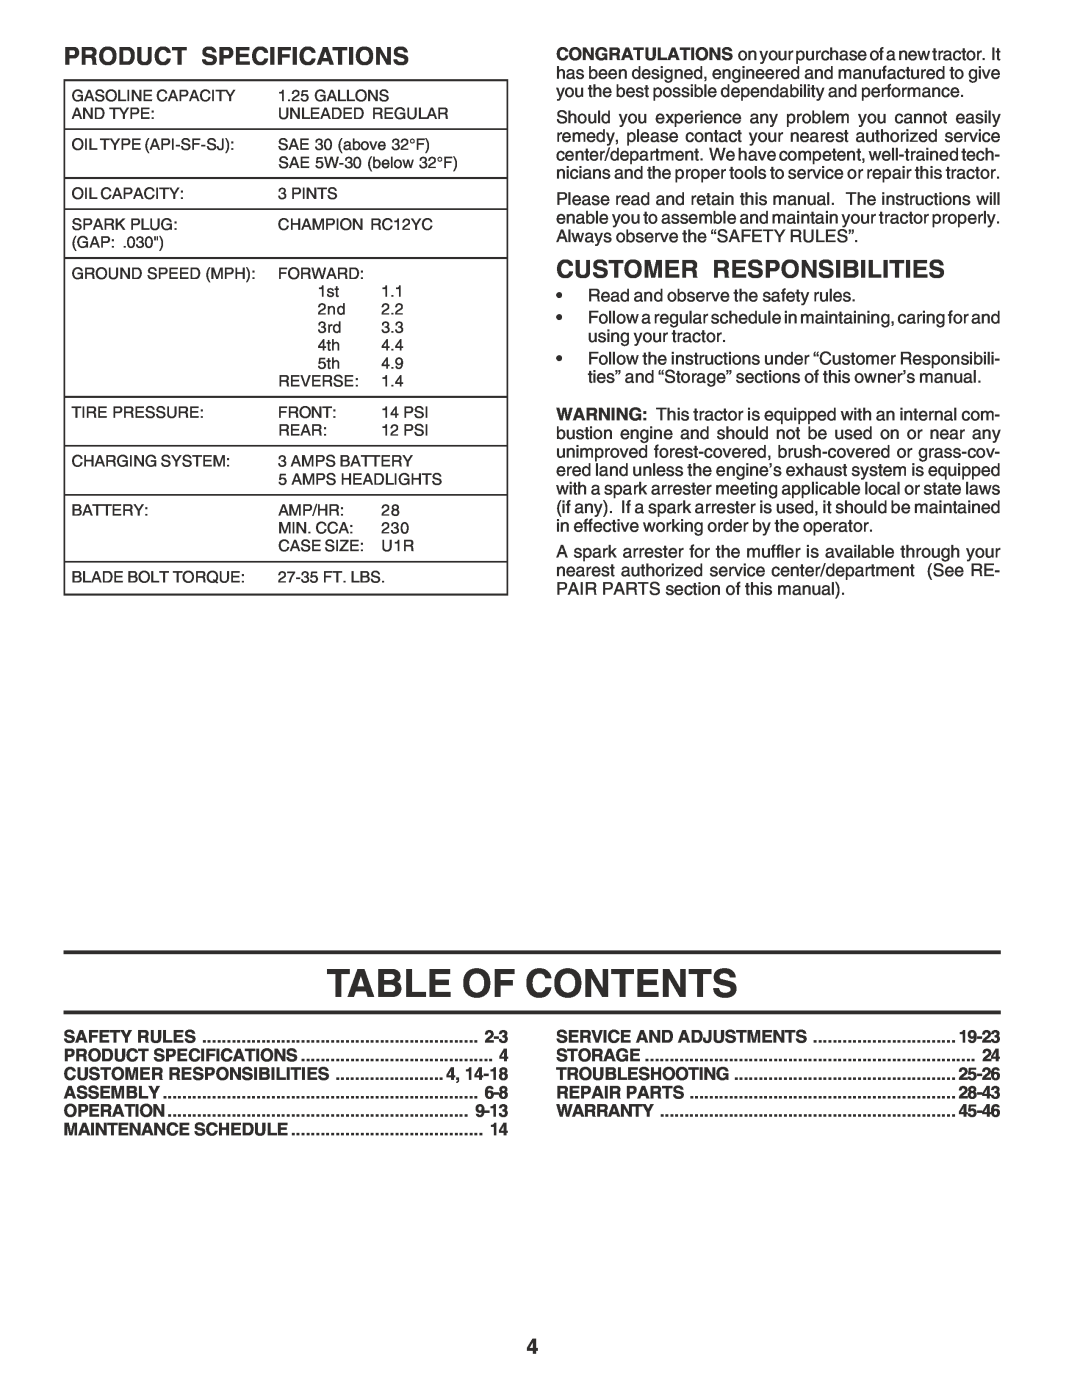 Weed Eater WE1538B manual Table Of Contents, Product Specifications, Customer Responsibilities 